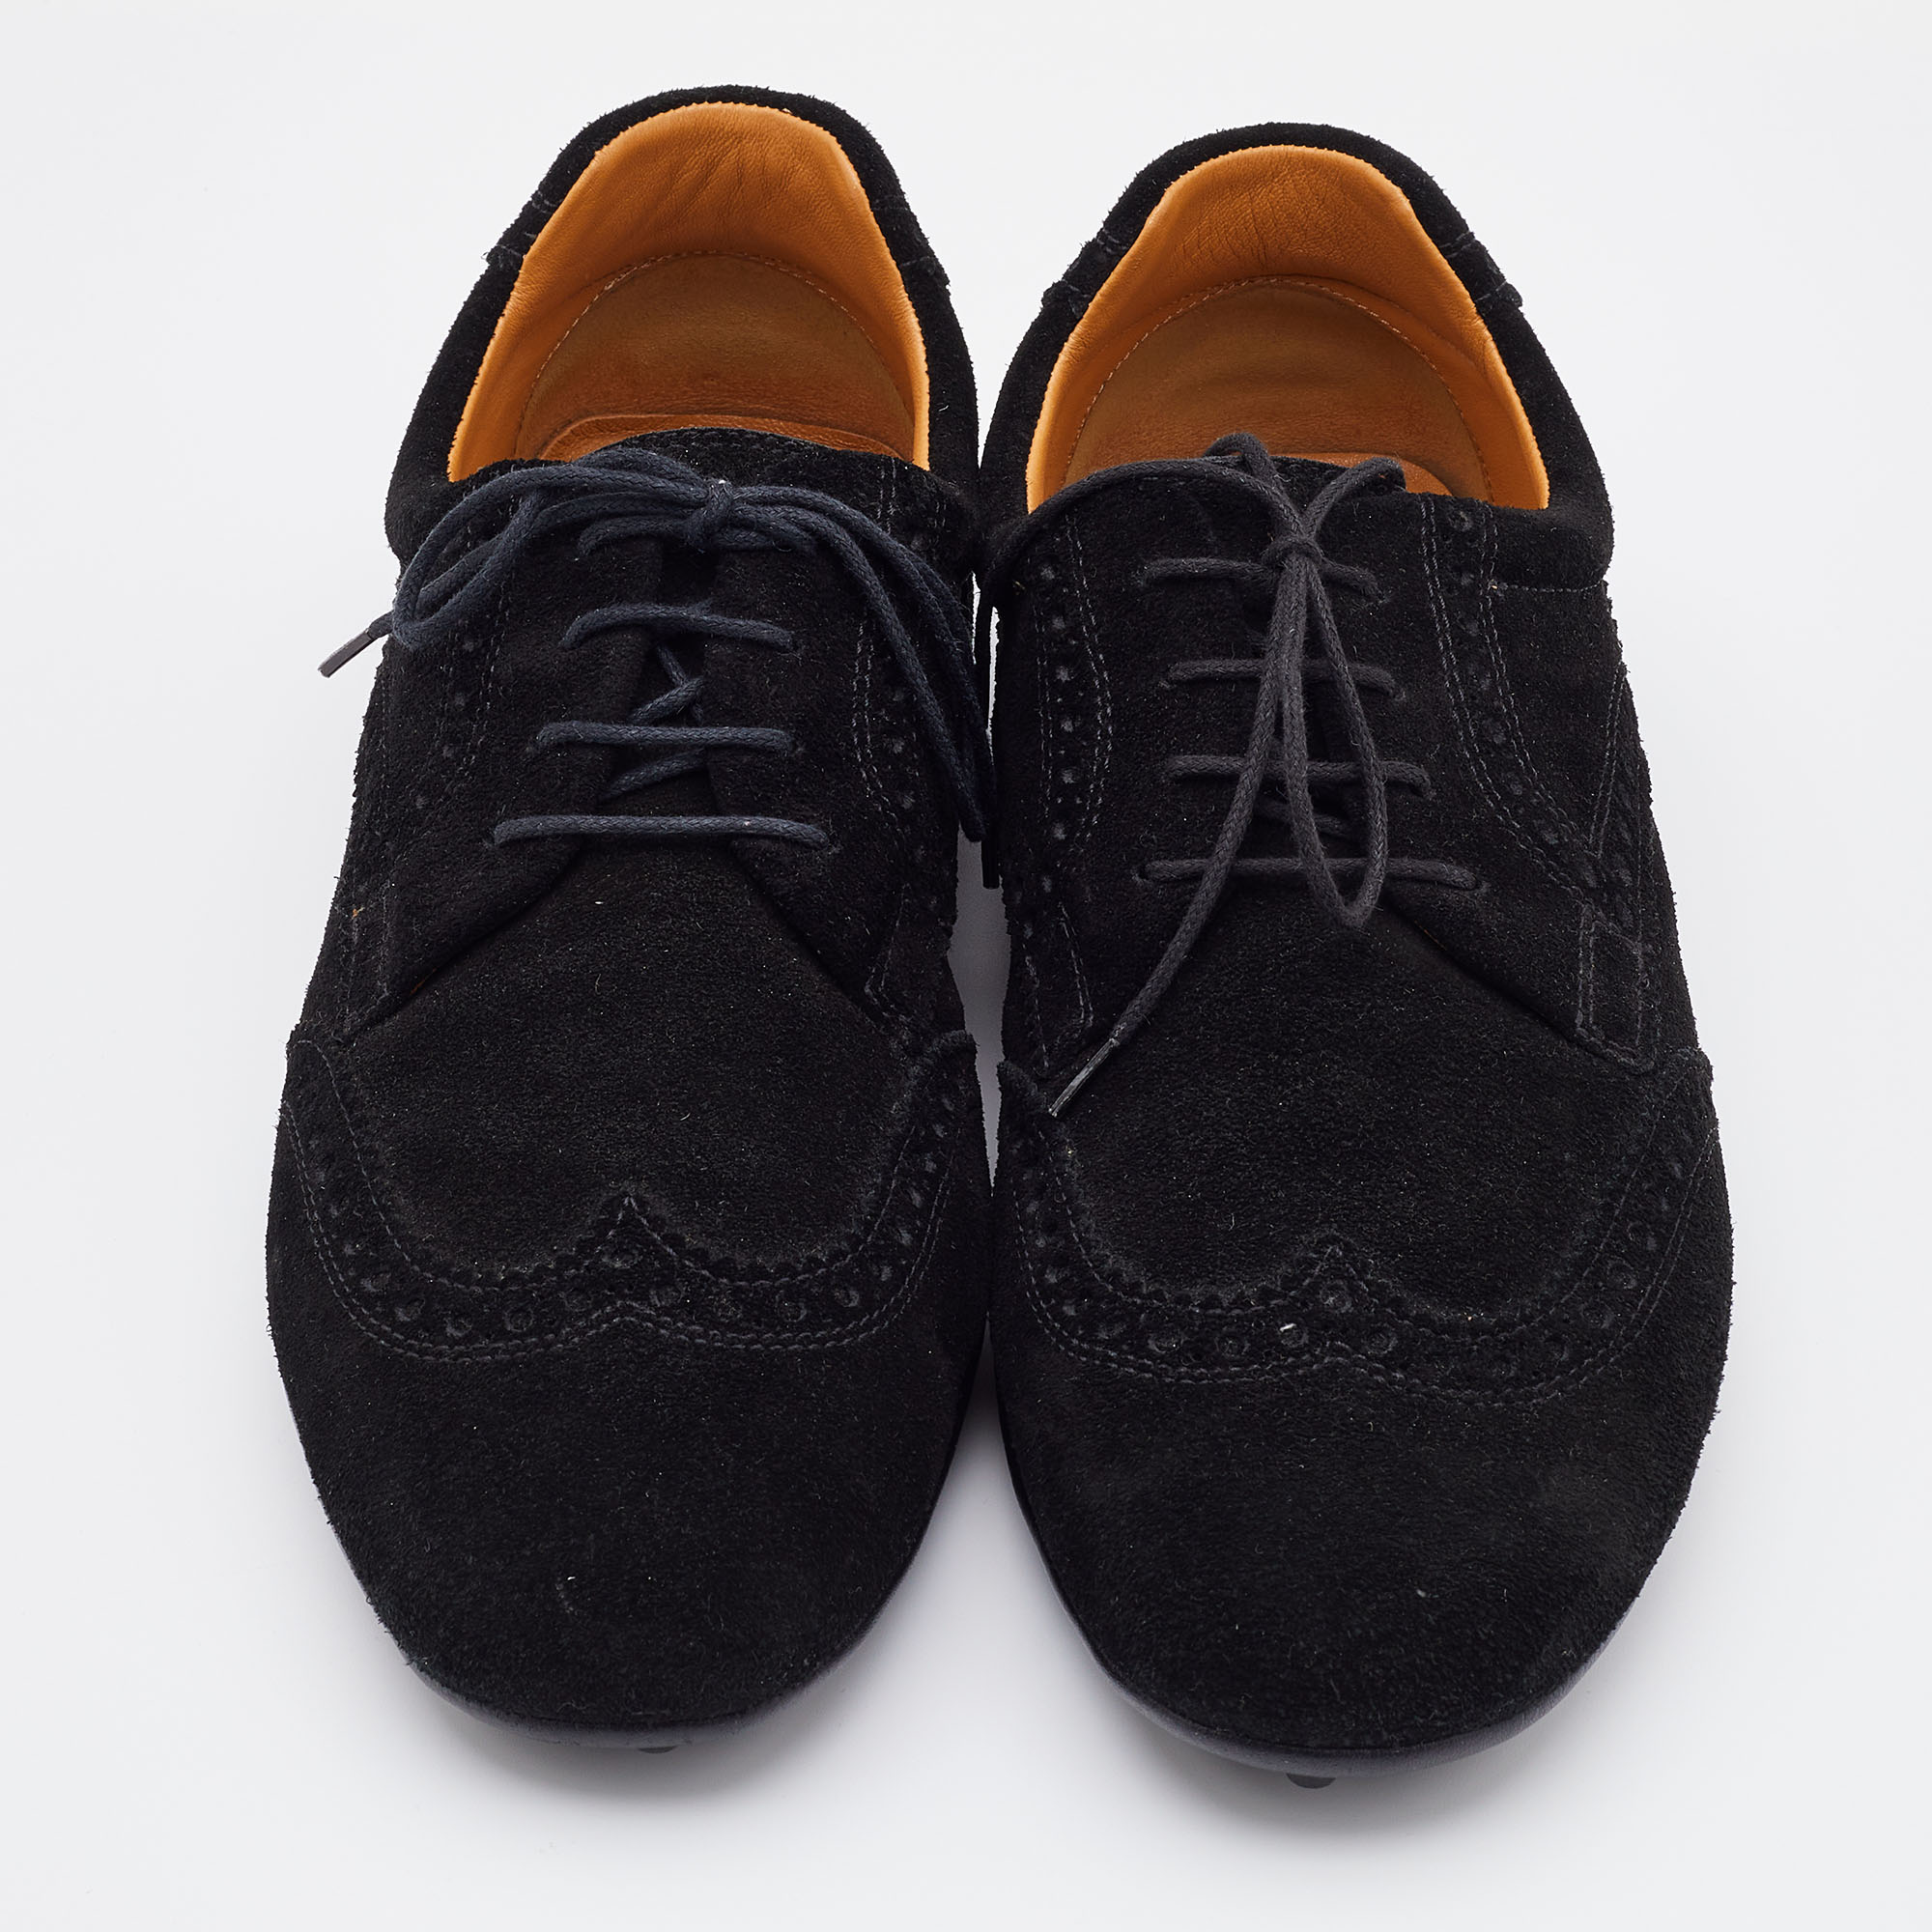 Gucci Black Brogue Suede Derby Lace Up Loafers Size 41